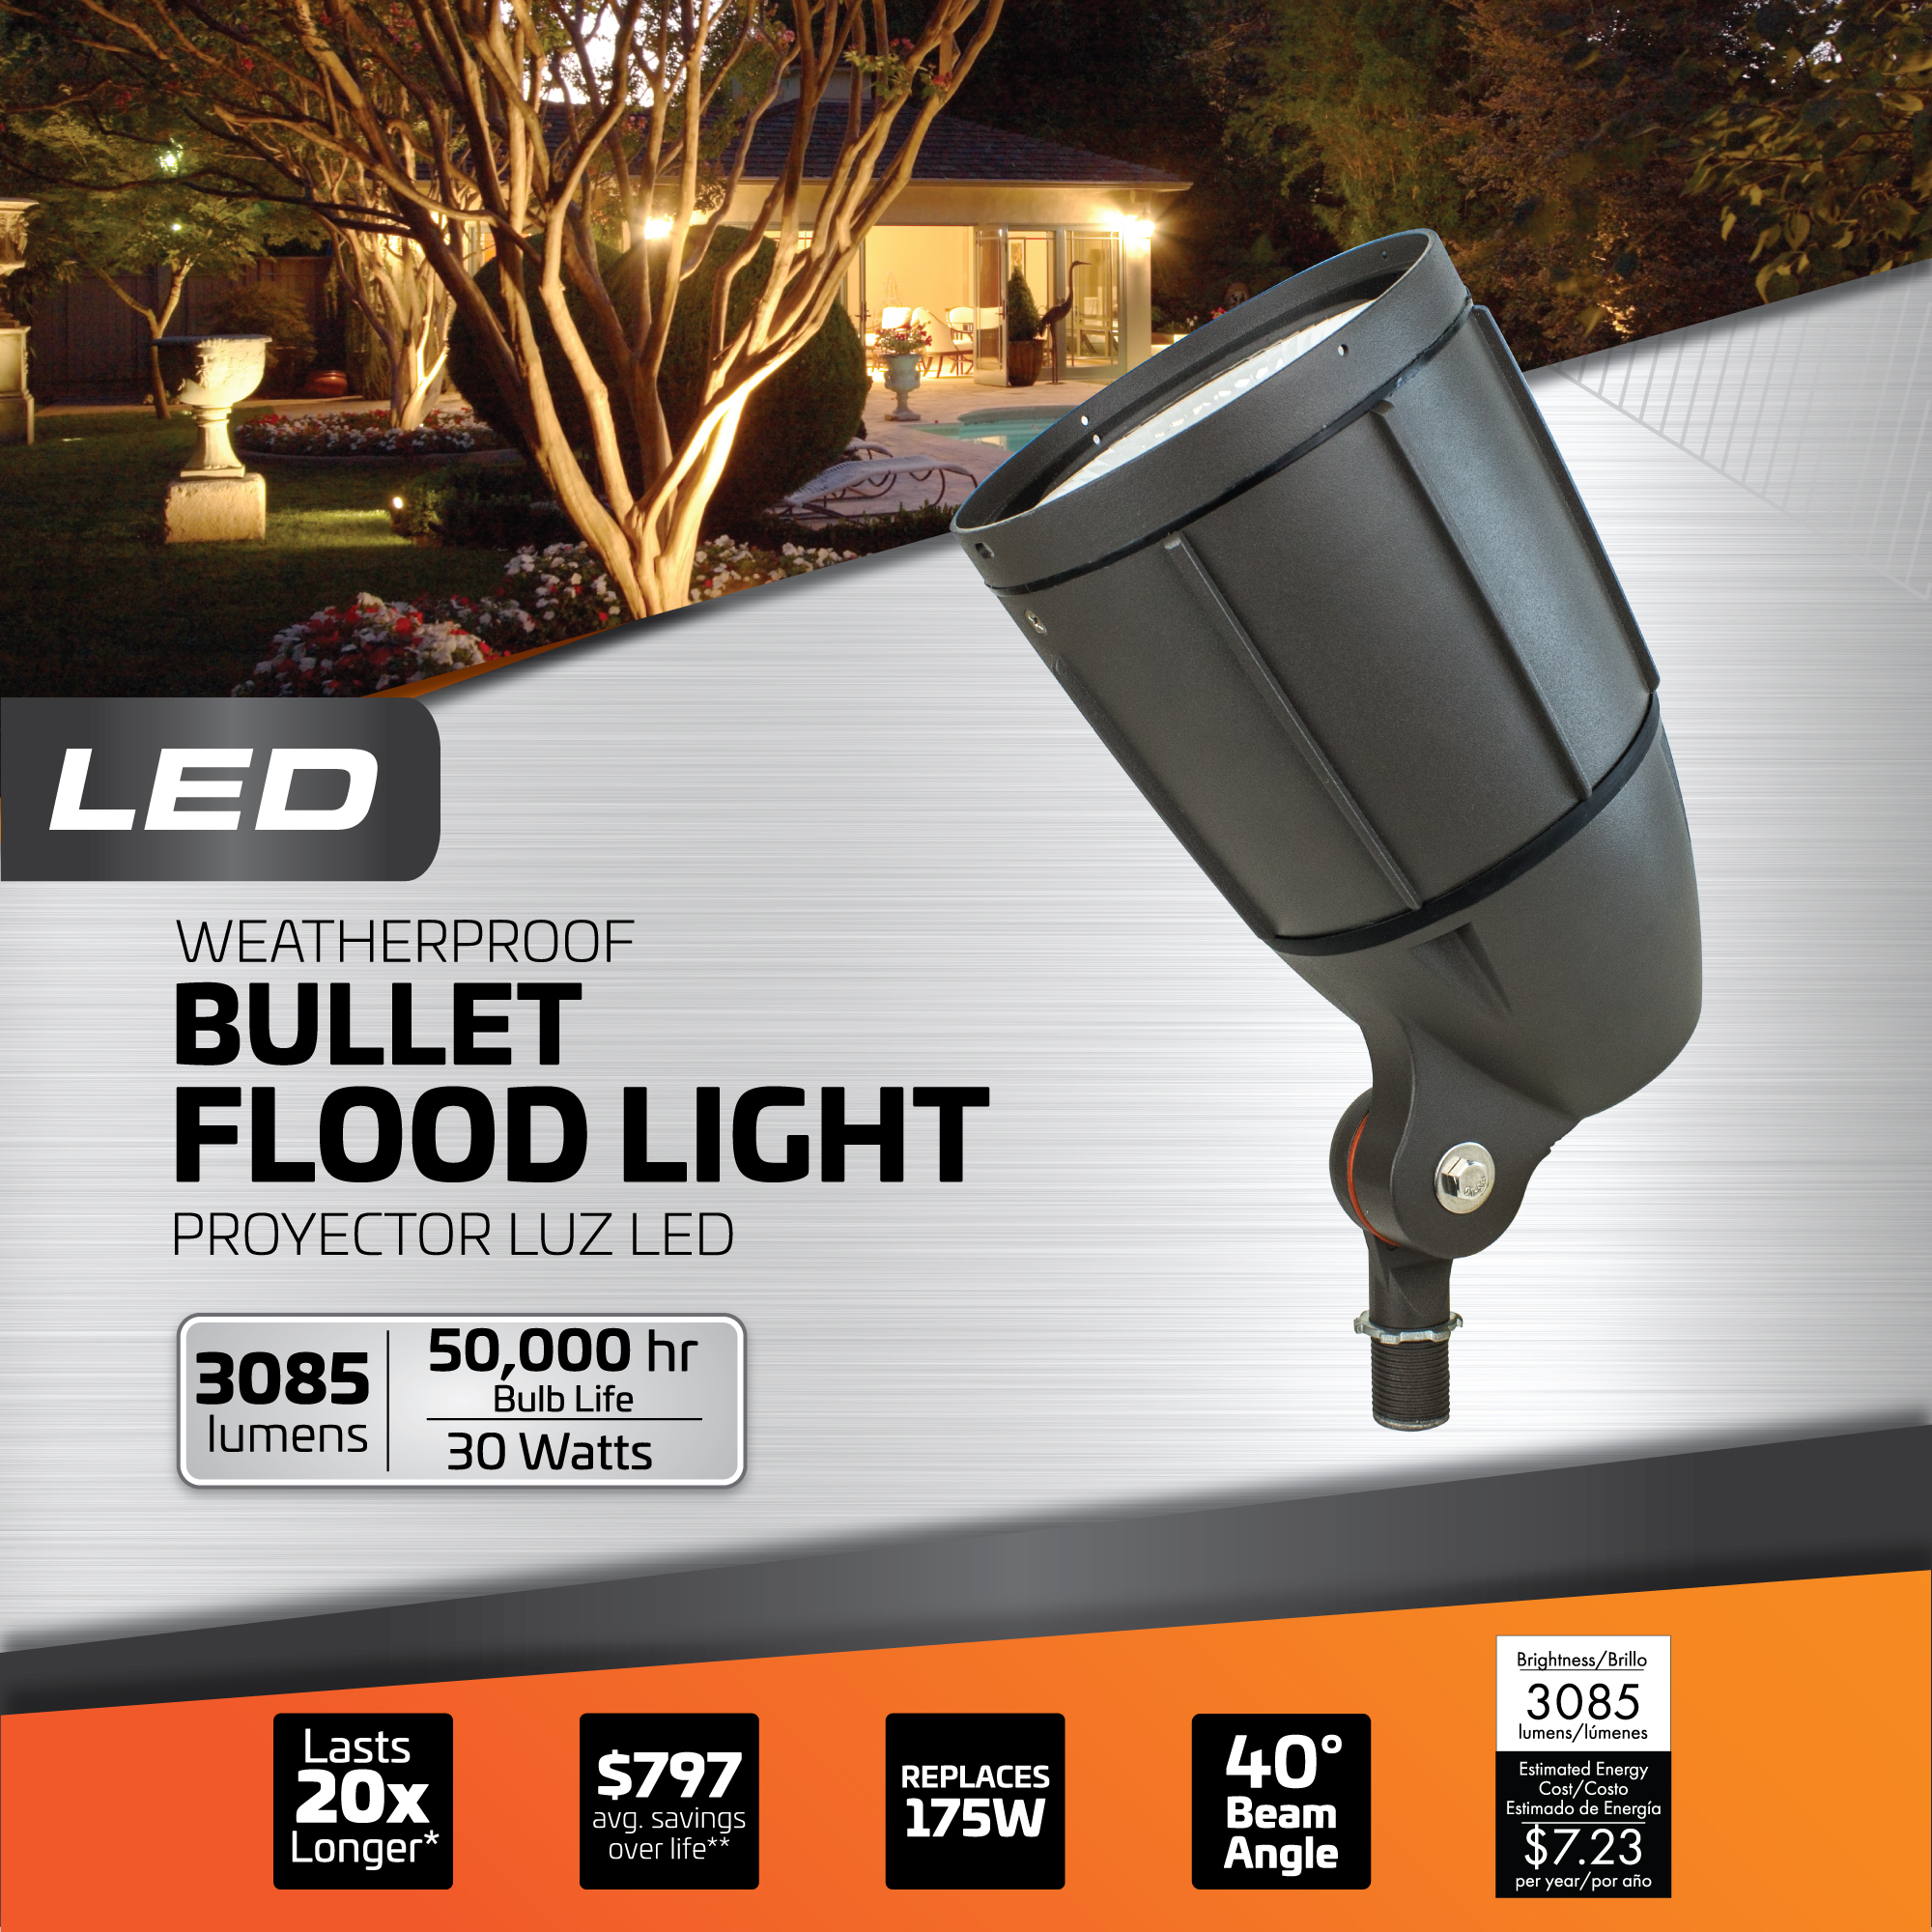 Newhouse Lighting BLF30BRZ 30-Watt Outdoor LED Flood Light, Weatherproof, Bronze. For use in flag pole, flood, backyards, playground, and landscape lighting applications. - image 3 of 6